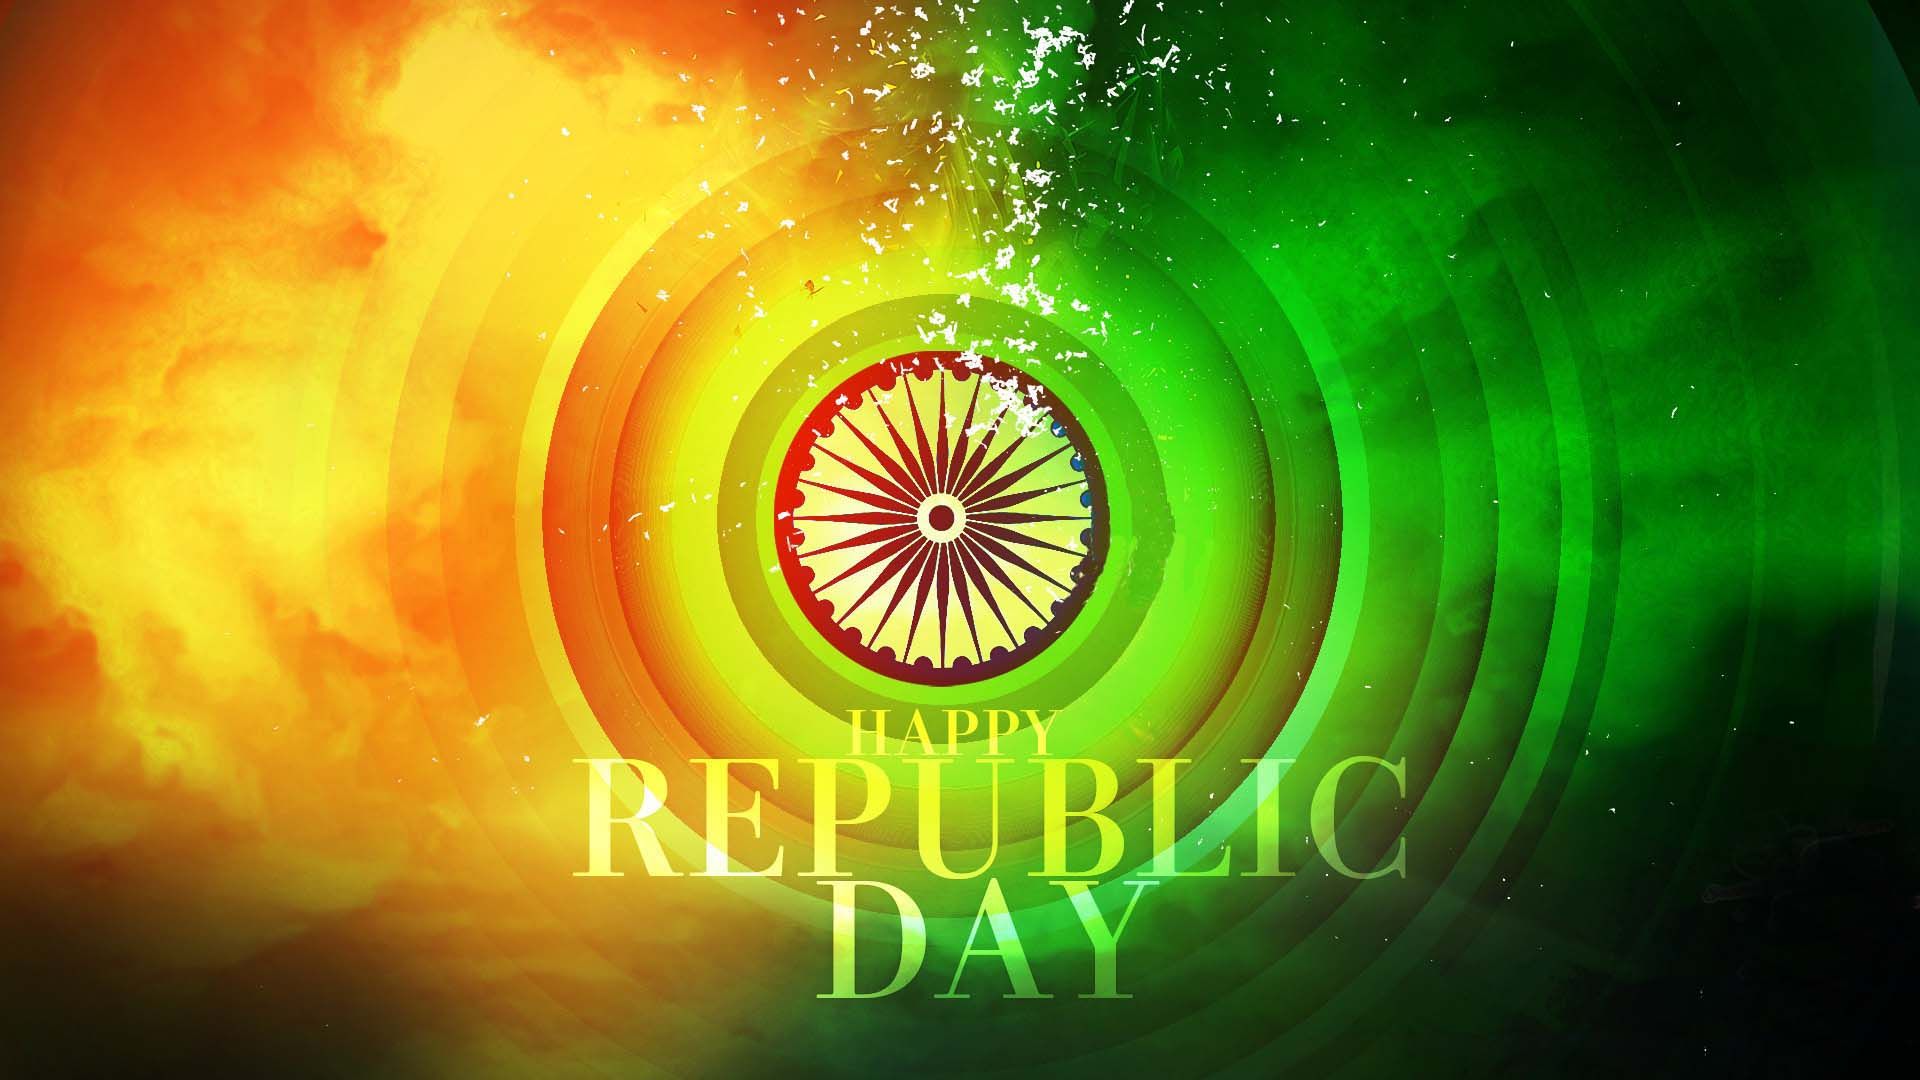 Republic Day - Republic Day Images 2018 Download , HD Wallpaper & Backgrounds